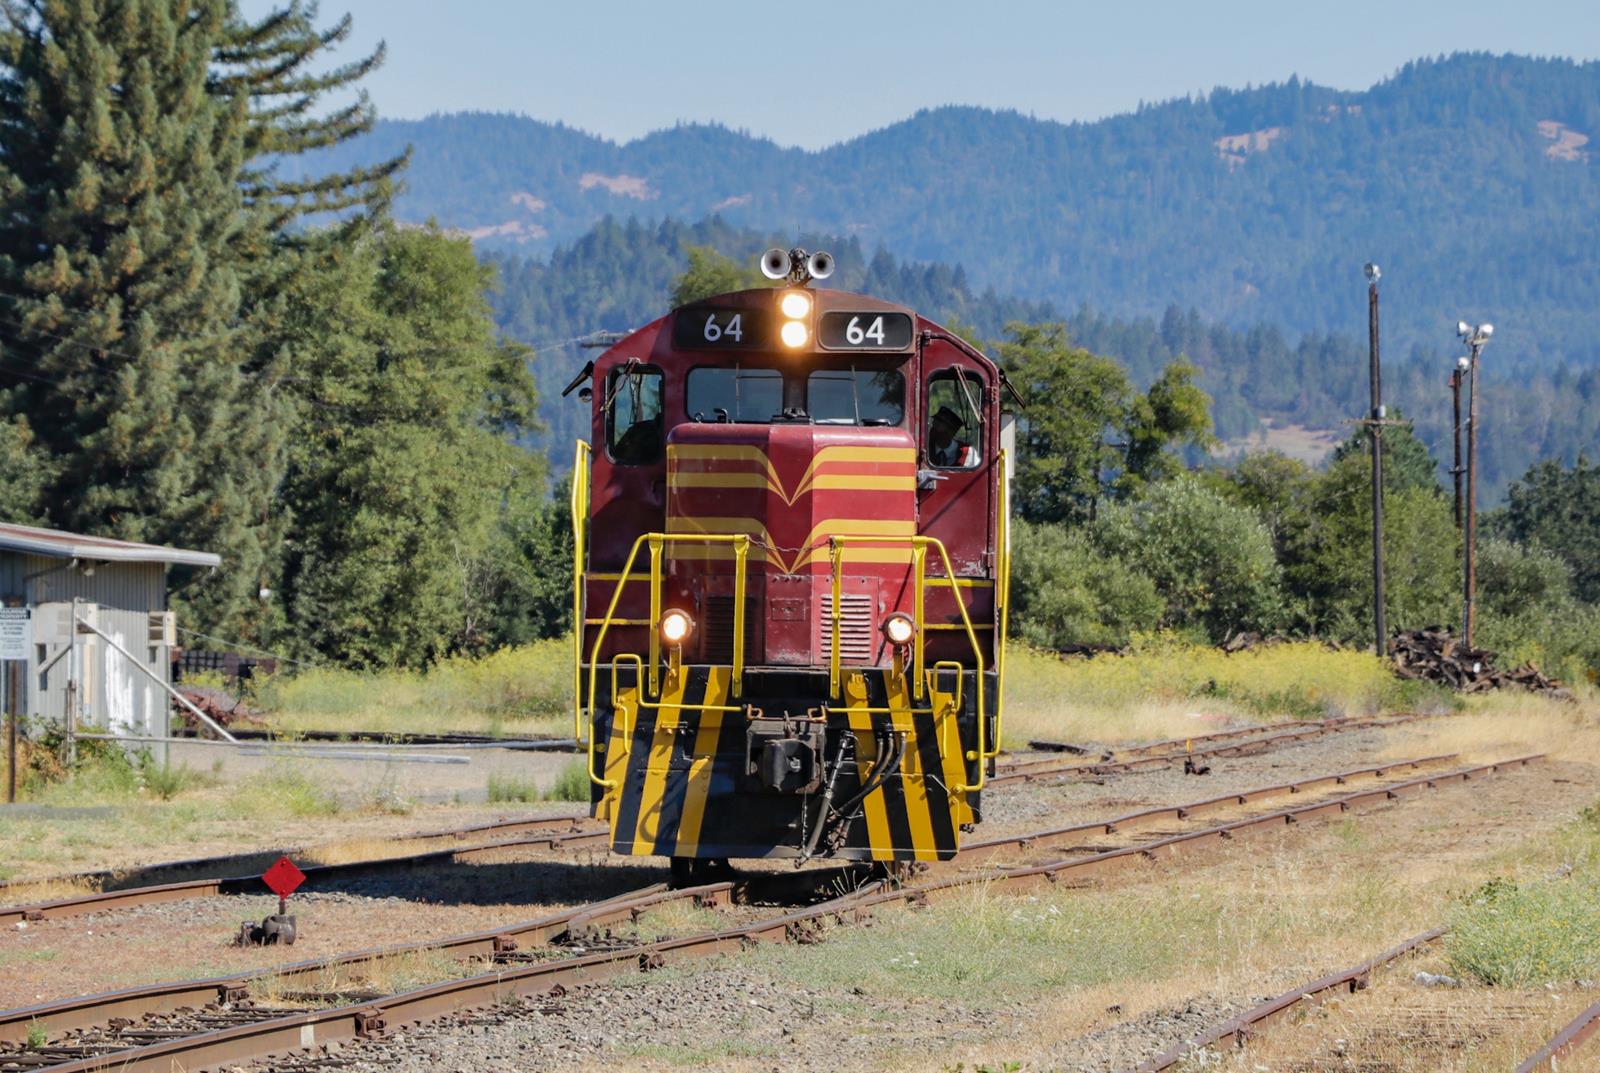 CWR 64 is a class EMD GP9 and  is pictured in Willits, California, USA.  This was taken along the California Western Railroad on the California Western Railroad. Photo Copyright: Casey Naton uploaded to Railroad Gallery on 11/22/2022. This photograph of CWR 64 was taken on Thursday, August 05, 2021. All Rights Reserved. 